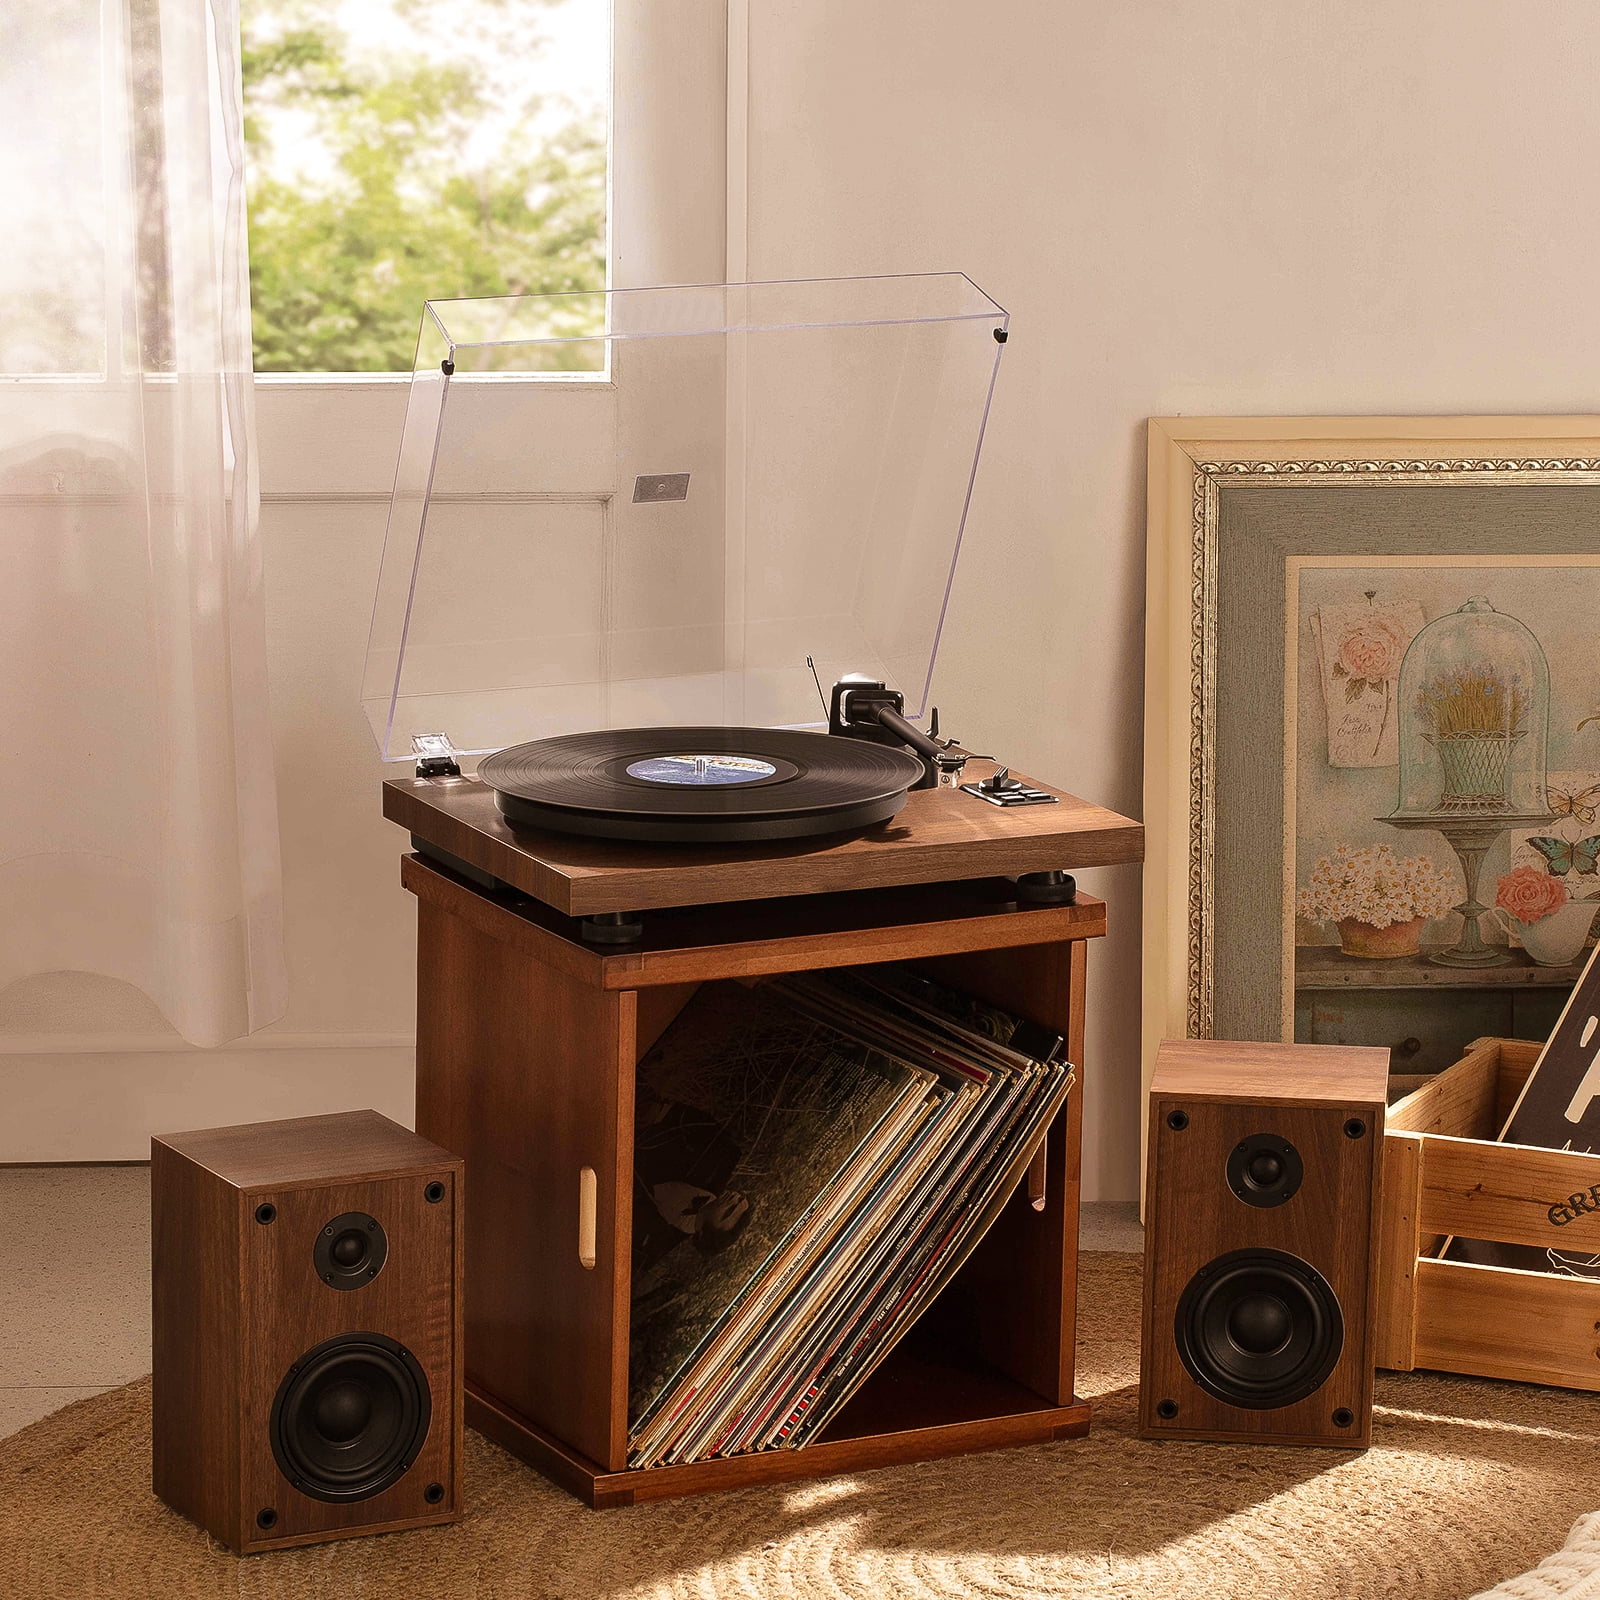 LP&No.1 Wireless Playback Turntable Hi-fi System with Stereo Bookshelf Speakers Retro Record Player with Adjustable Counterweight & Magnetic Cartridge,Antique & Nostalgic Turntable Record Player Mahogany Wood